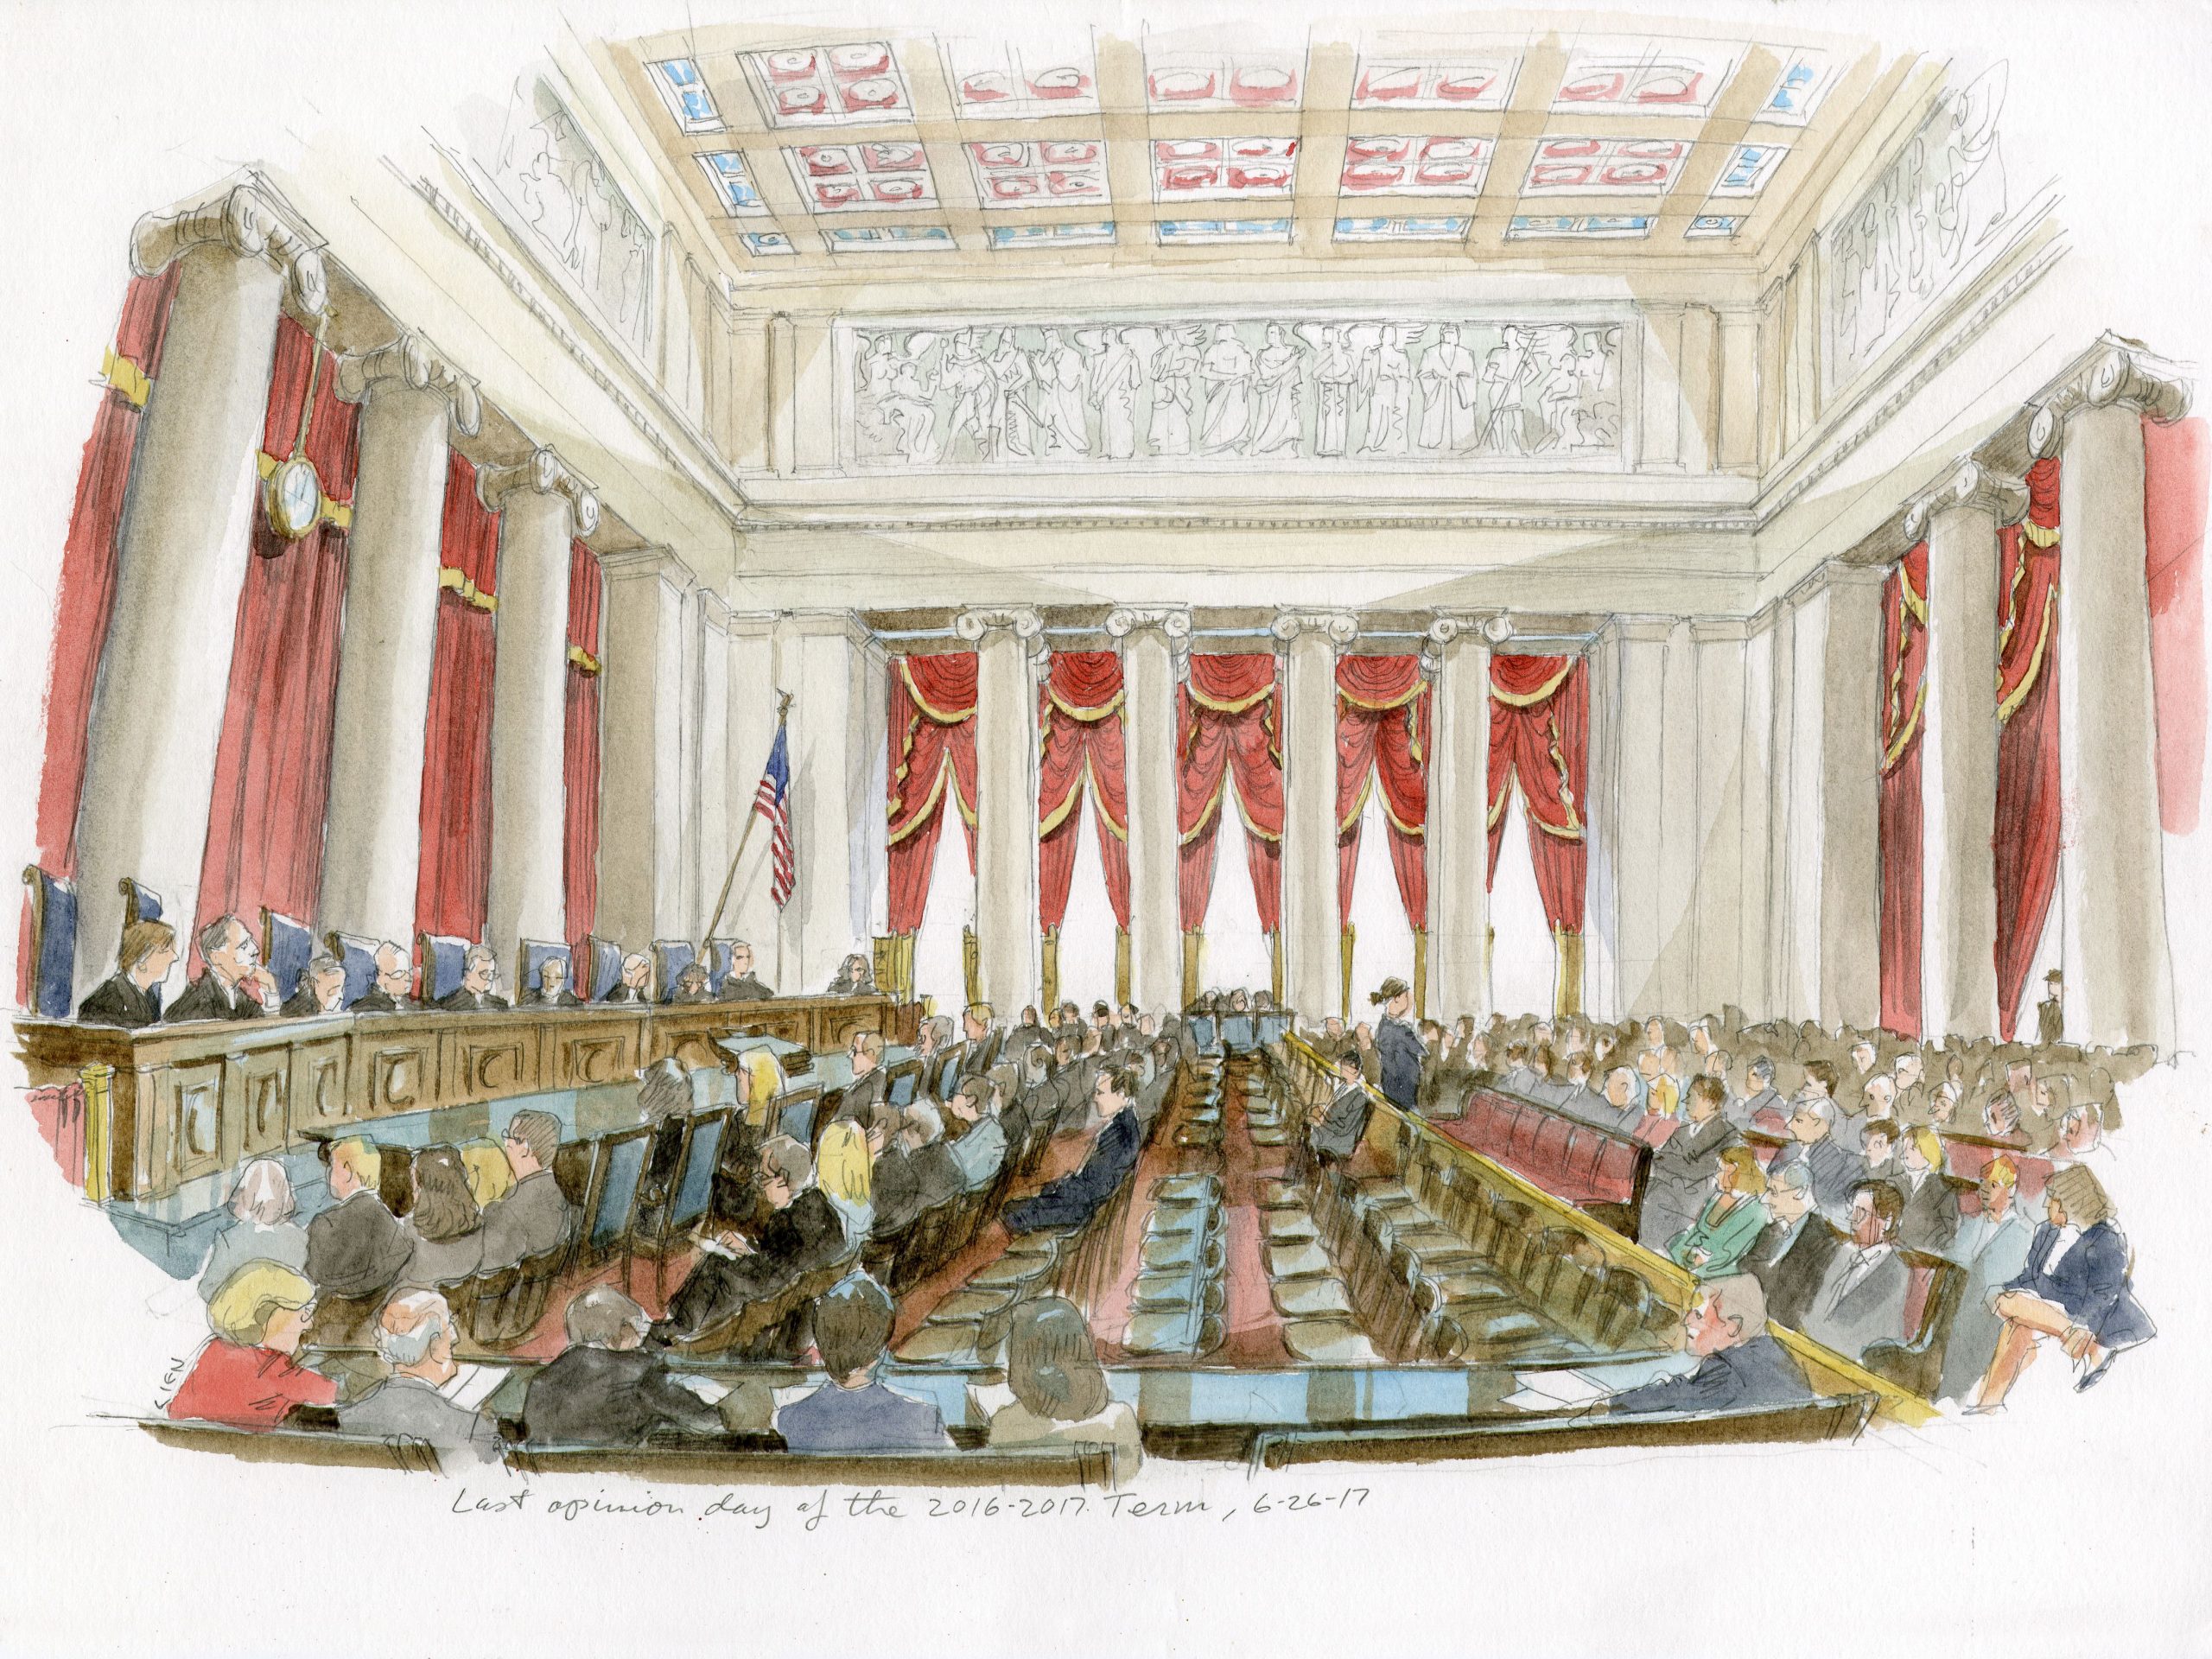 Sketch of the courtroom at the Supreme Court